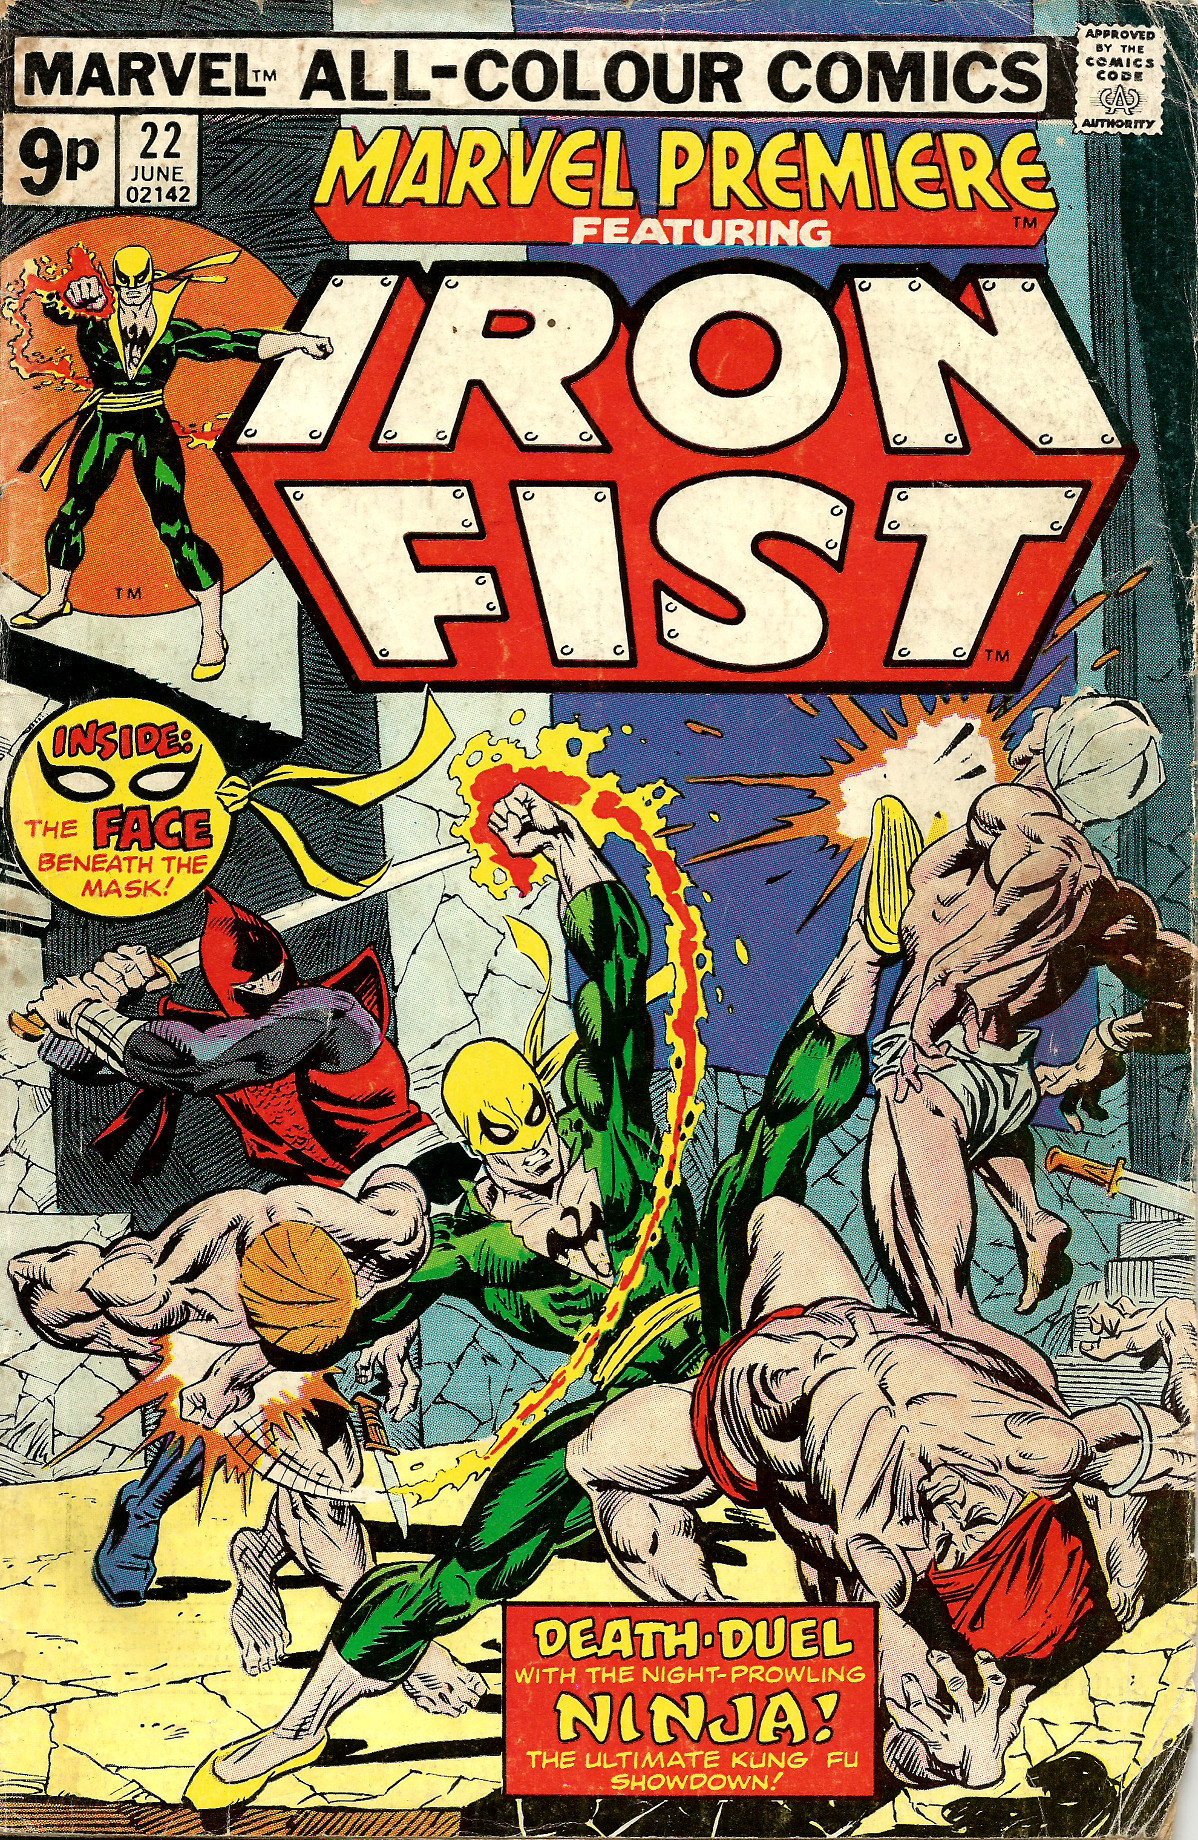 Marvel Premiere featuring Iron Fist, No.22 (Marvel Comics, 1975). Cover art by Gil